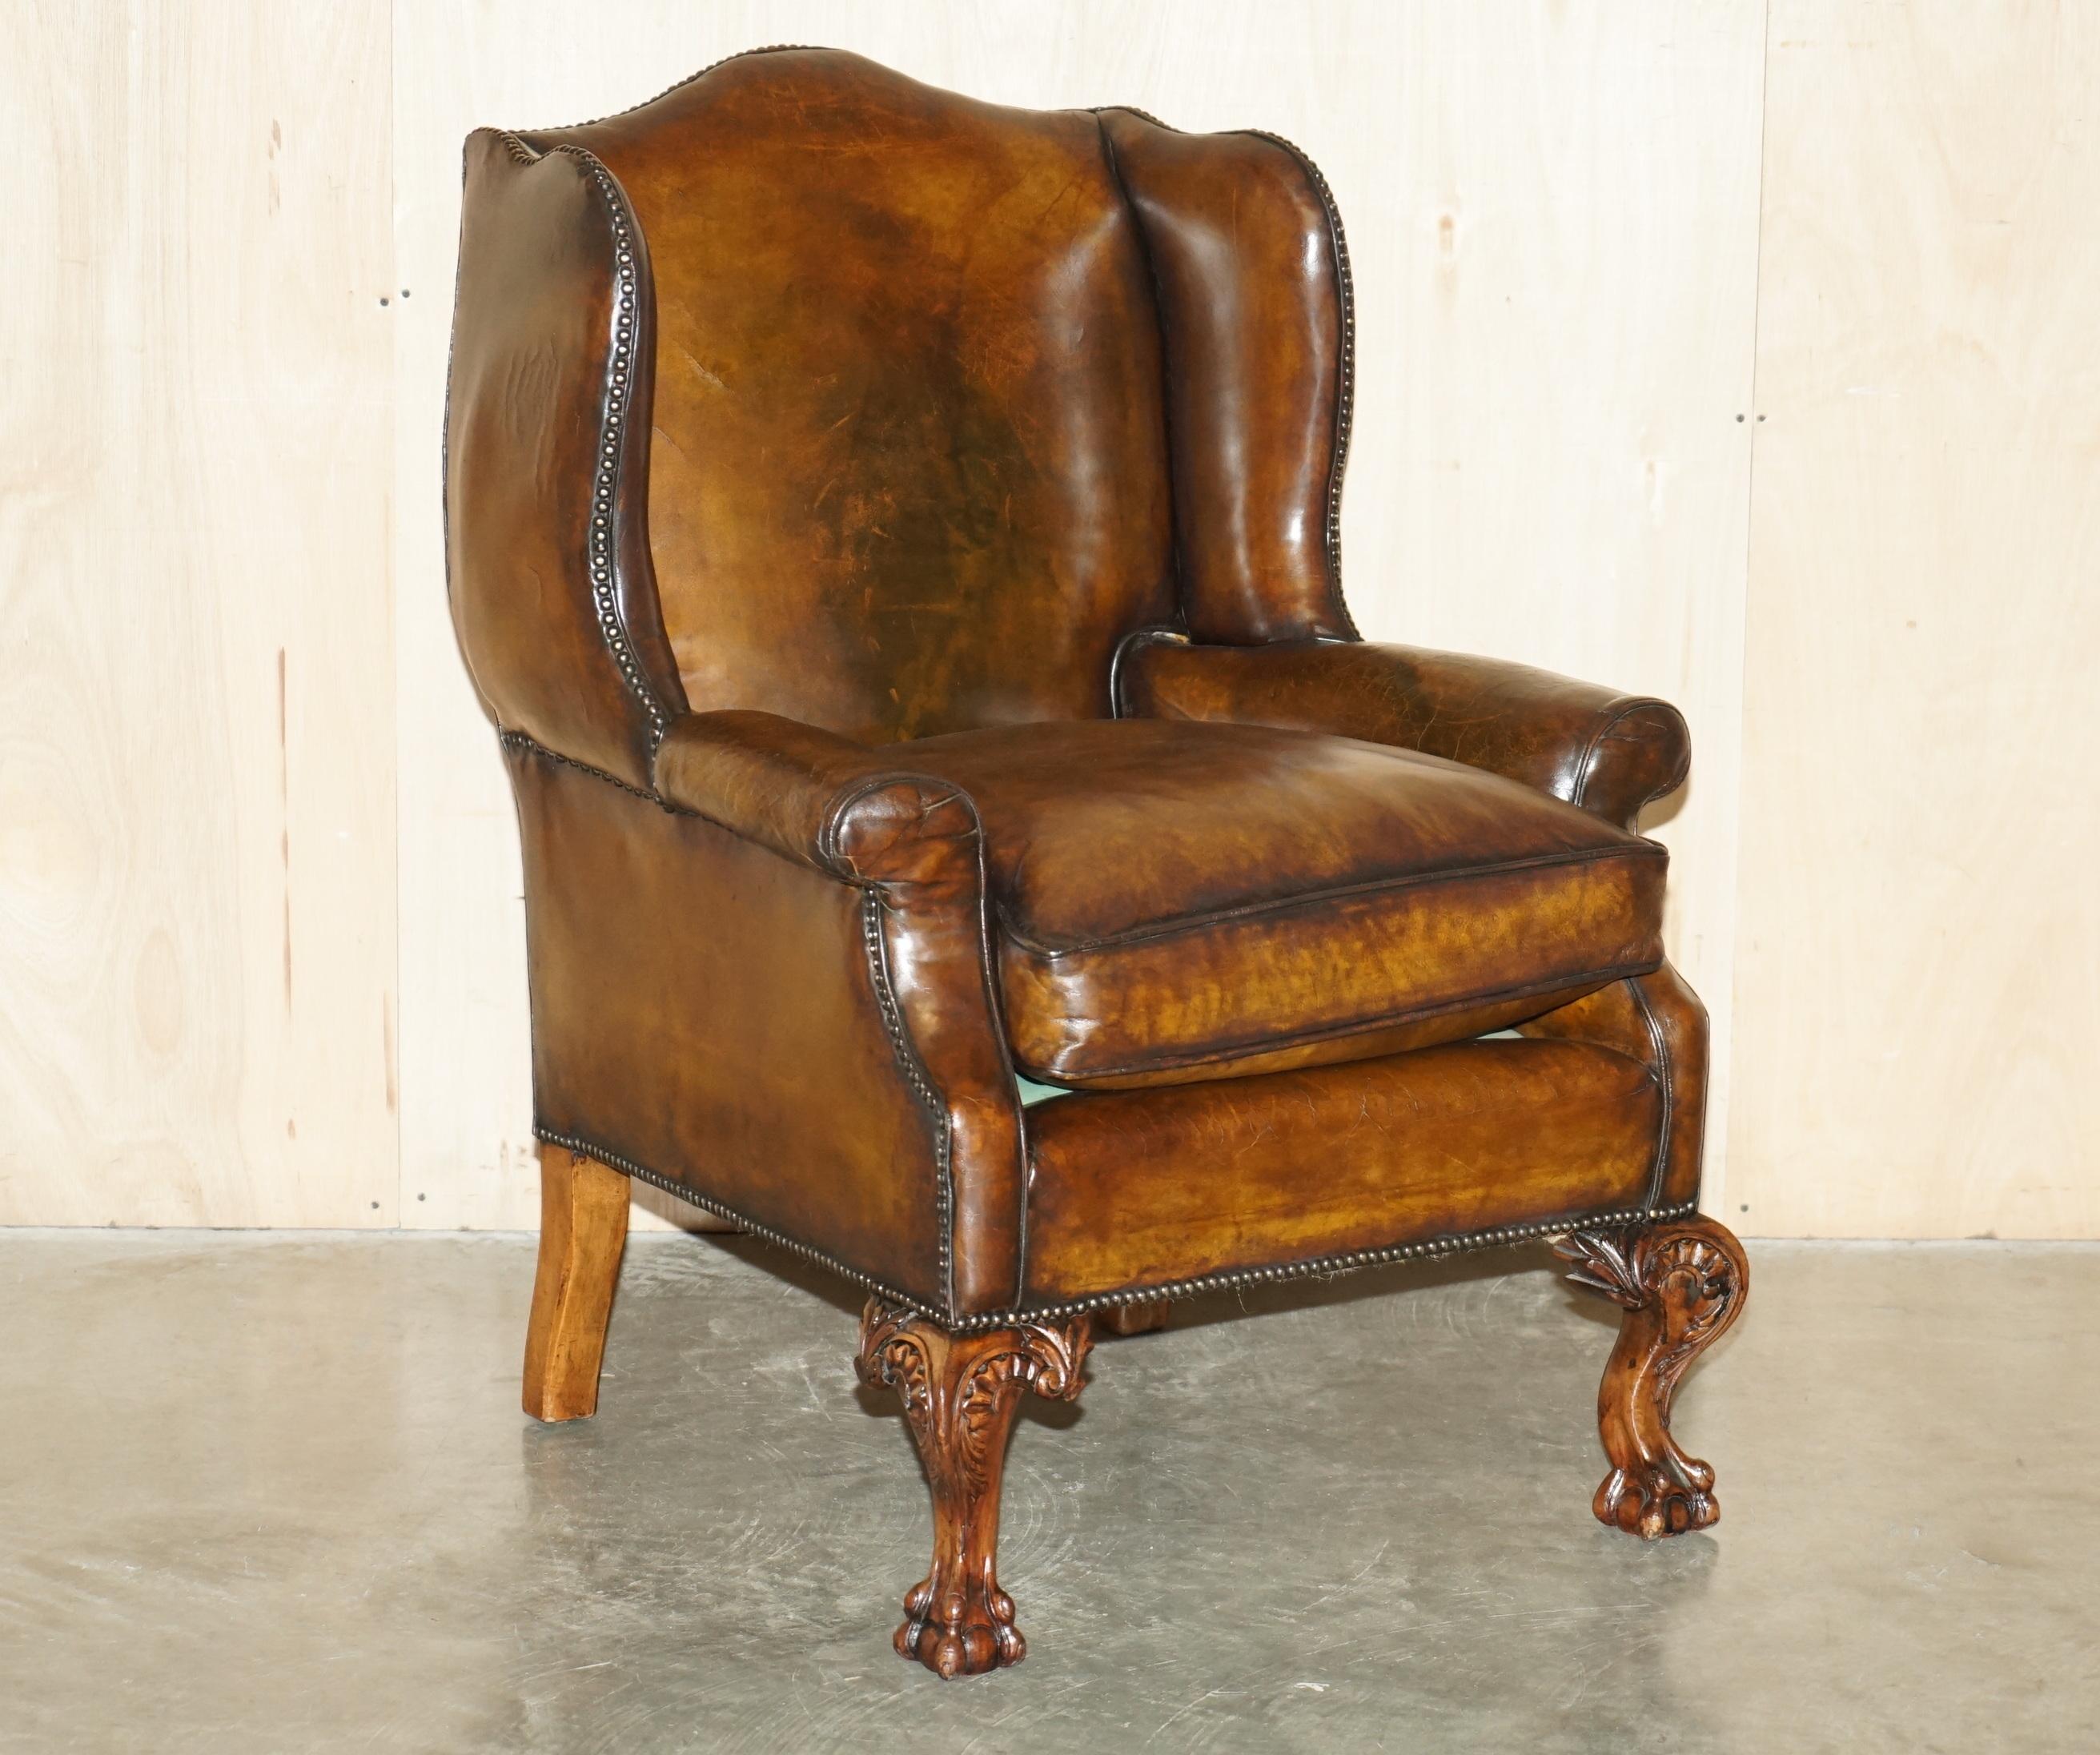 Royal House Antiques

Royal House Antiques is delighted to offer for sale this stunning, fully restored, hand dyed, very rare George II circa 1760 Wingback armchair

Please note the delivery fee listed is just a guide, it covers within the M25 only